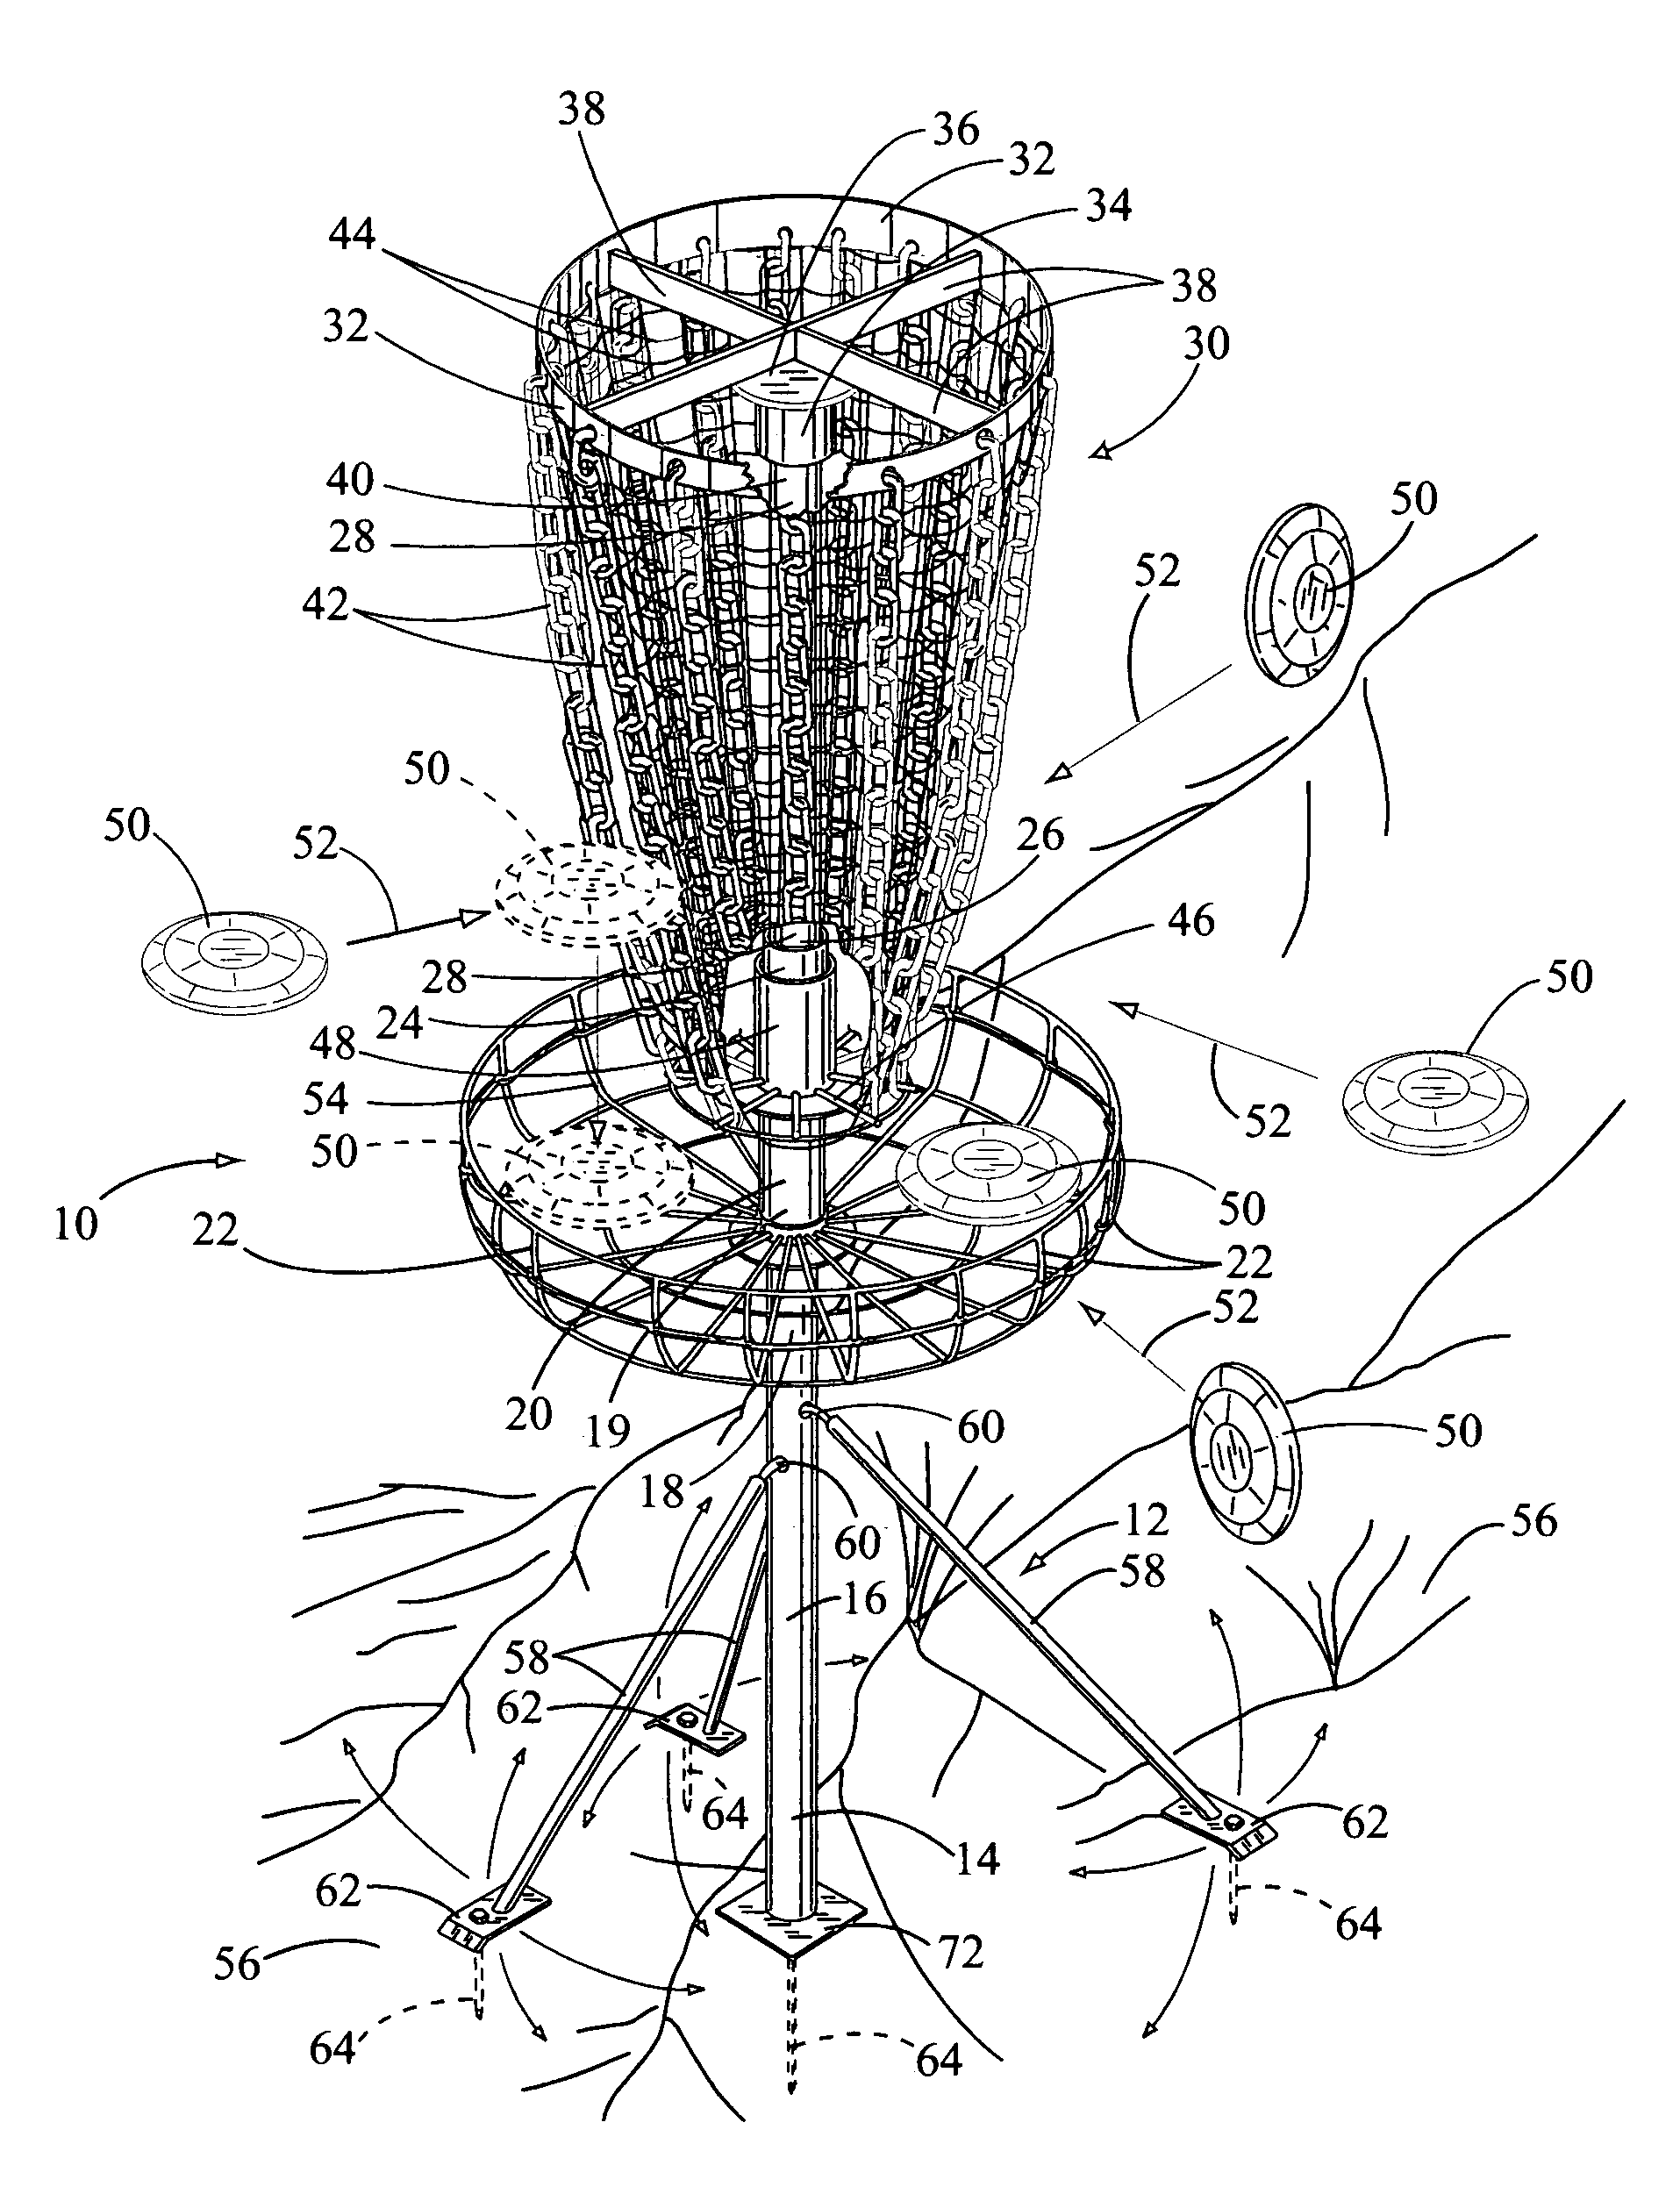 Flying disk target assembly for engaging and catching flying disk